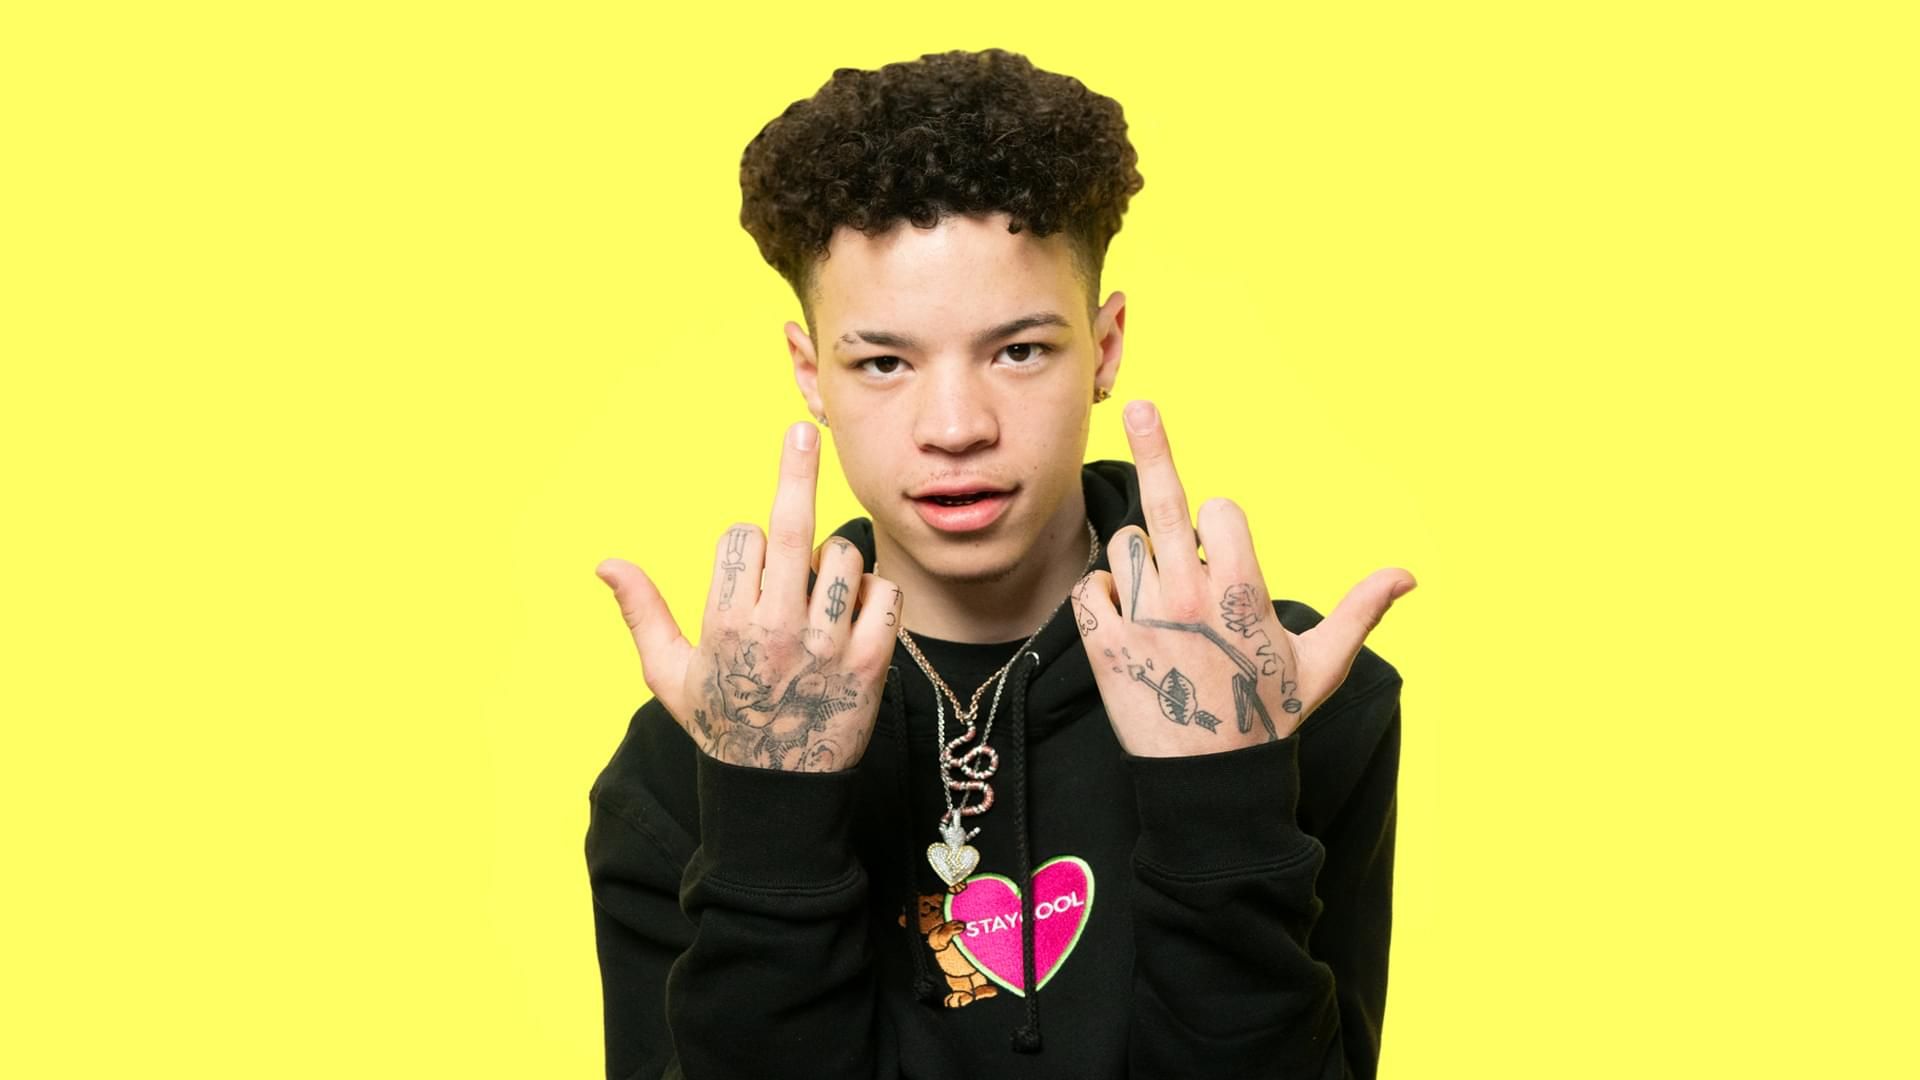 Lil Mosey Wallpapers posted by Samantha Anderson.